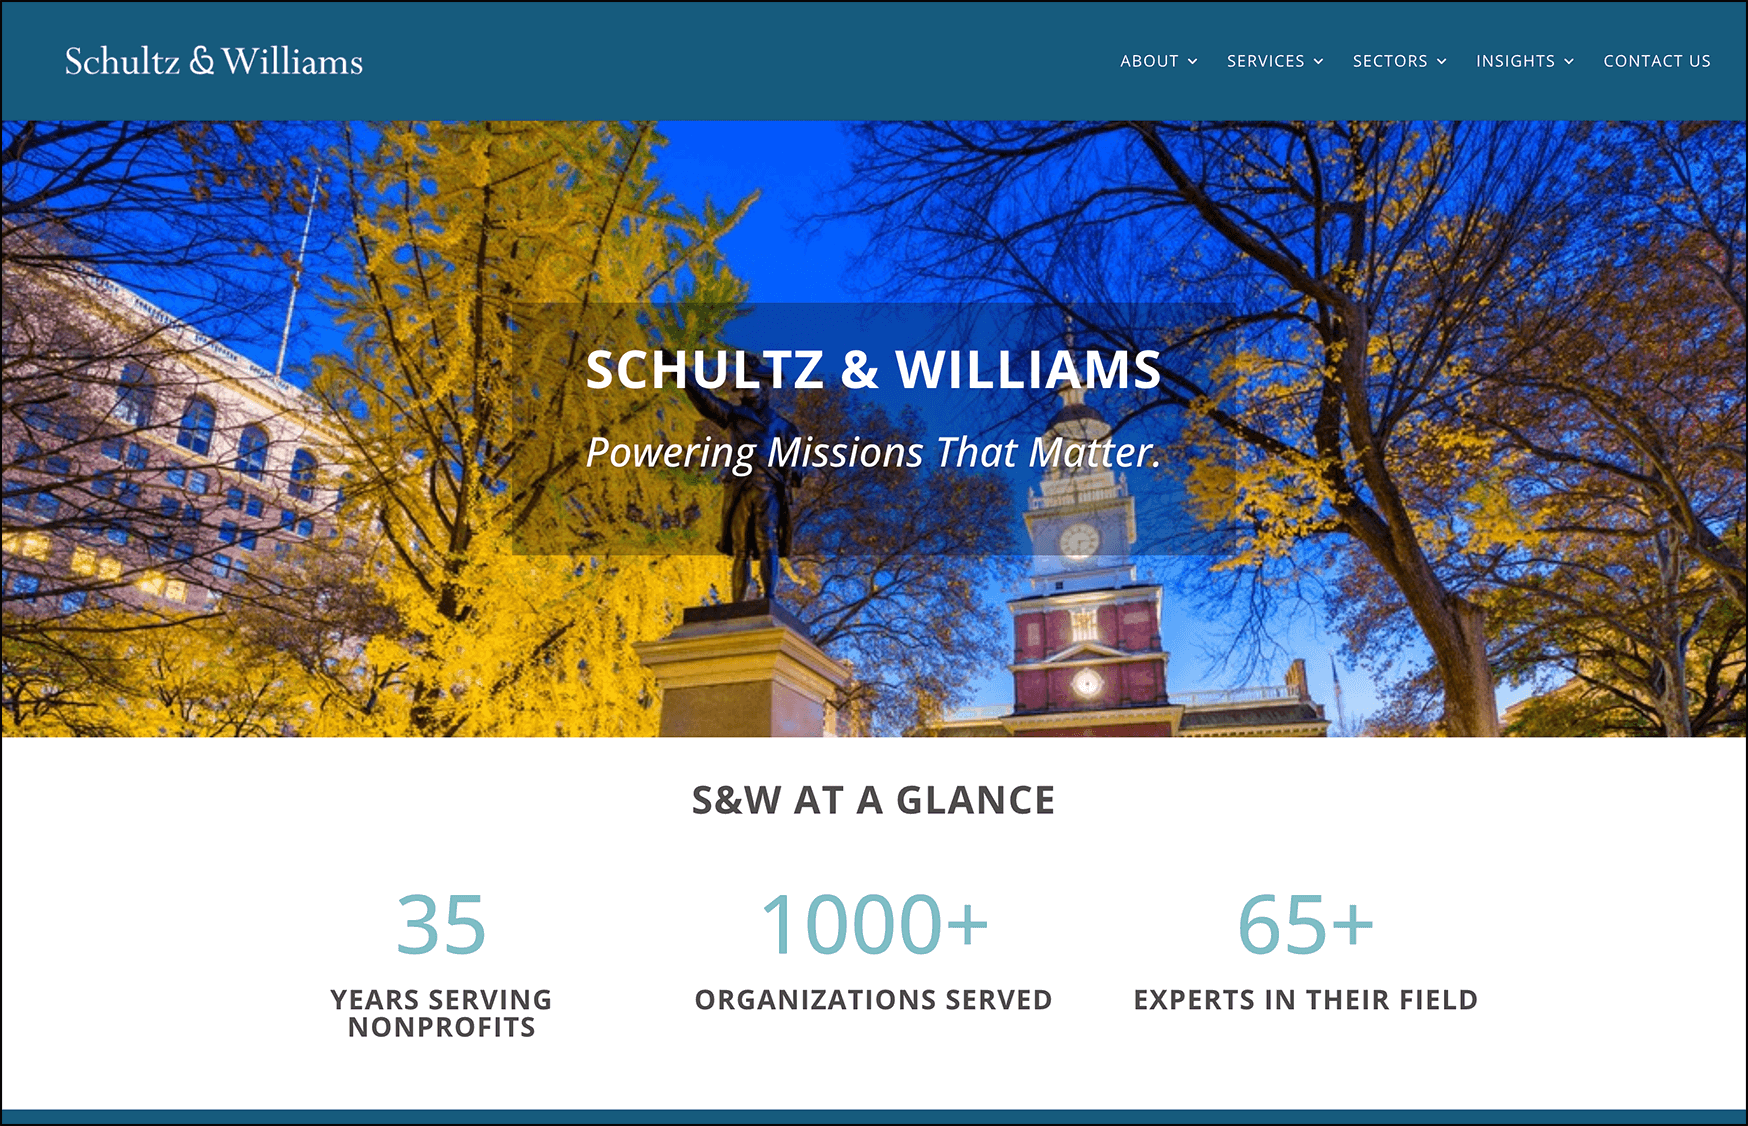 Schultz & Williams is a top fundraising consulting firm. 